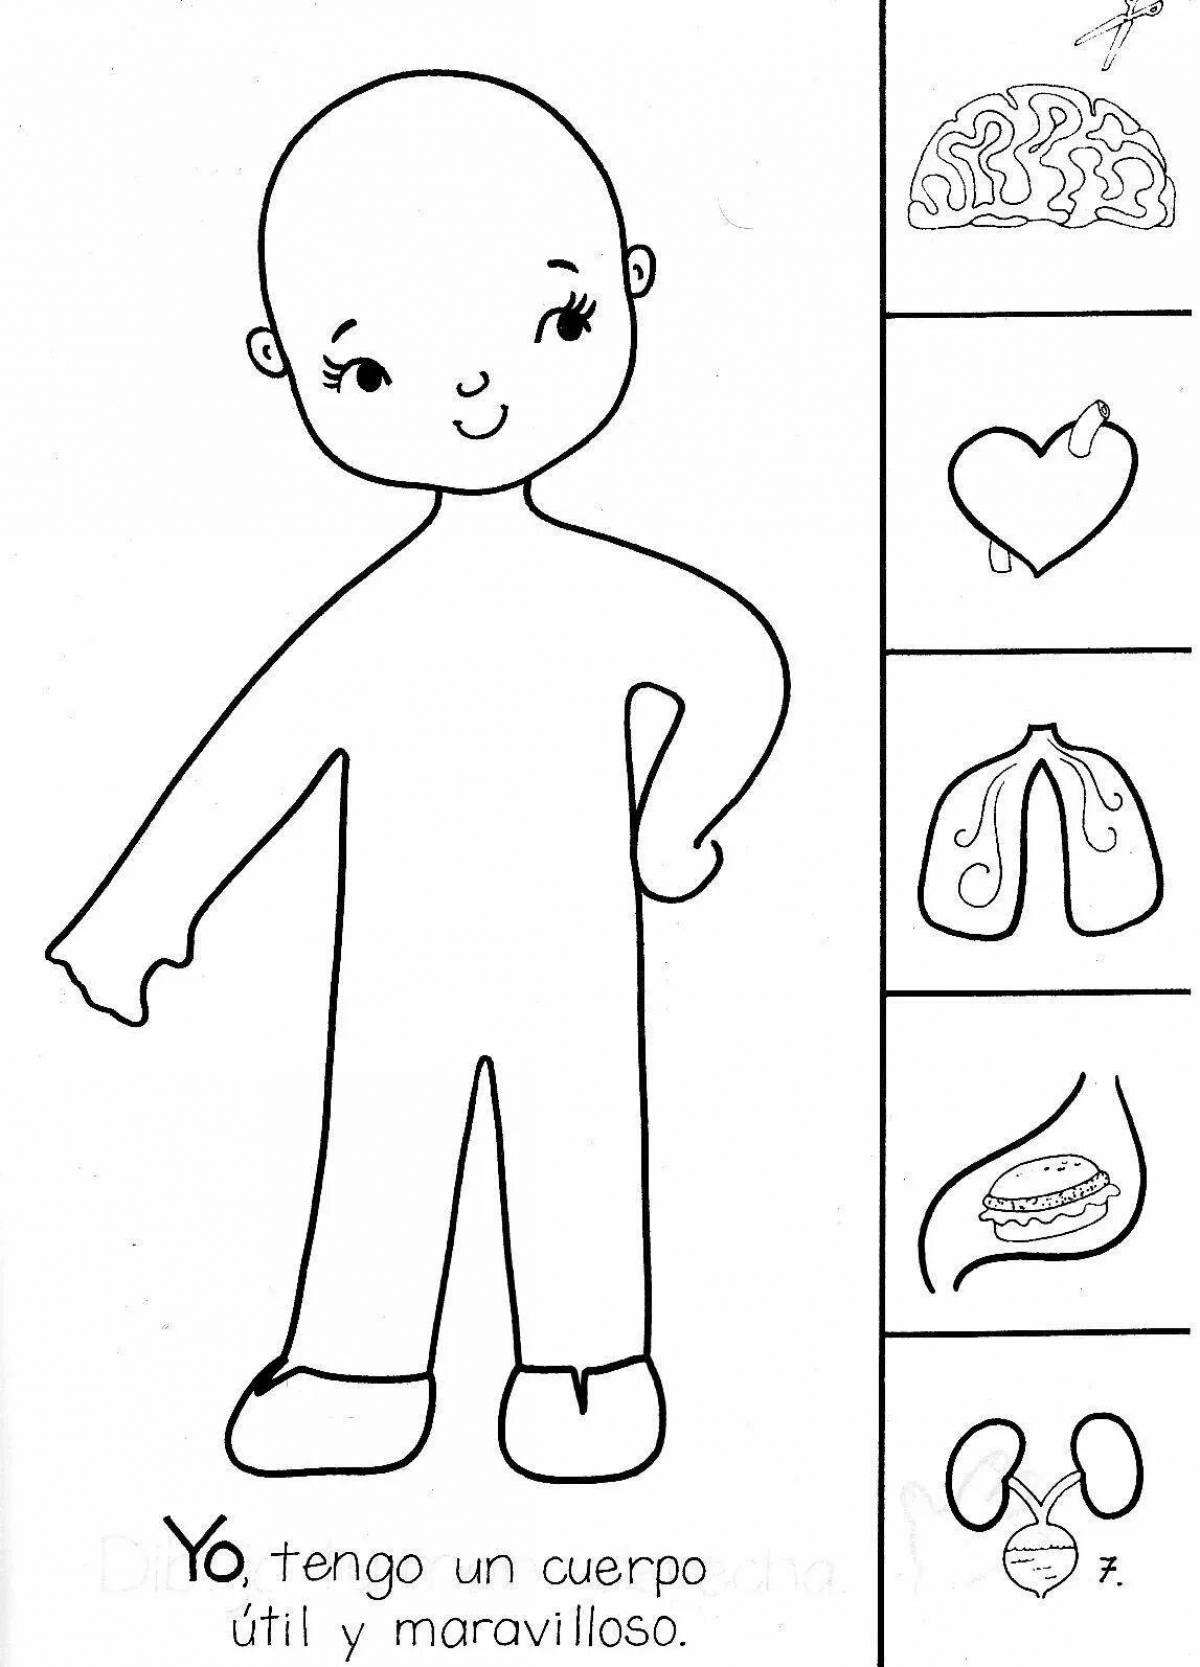 Fabulous people coloring pages for preschoolers